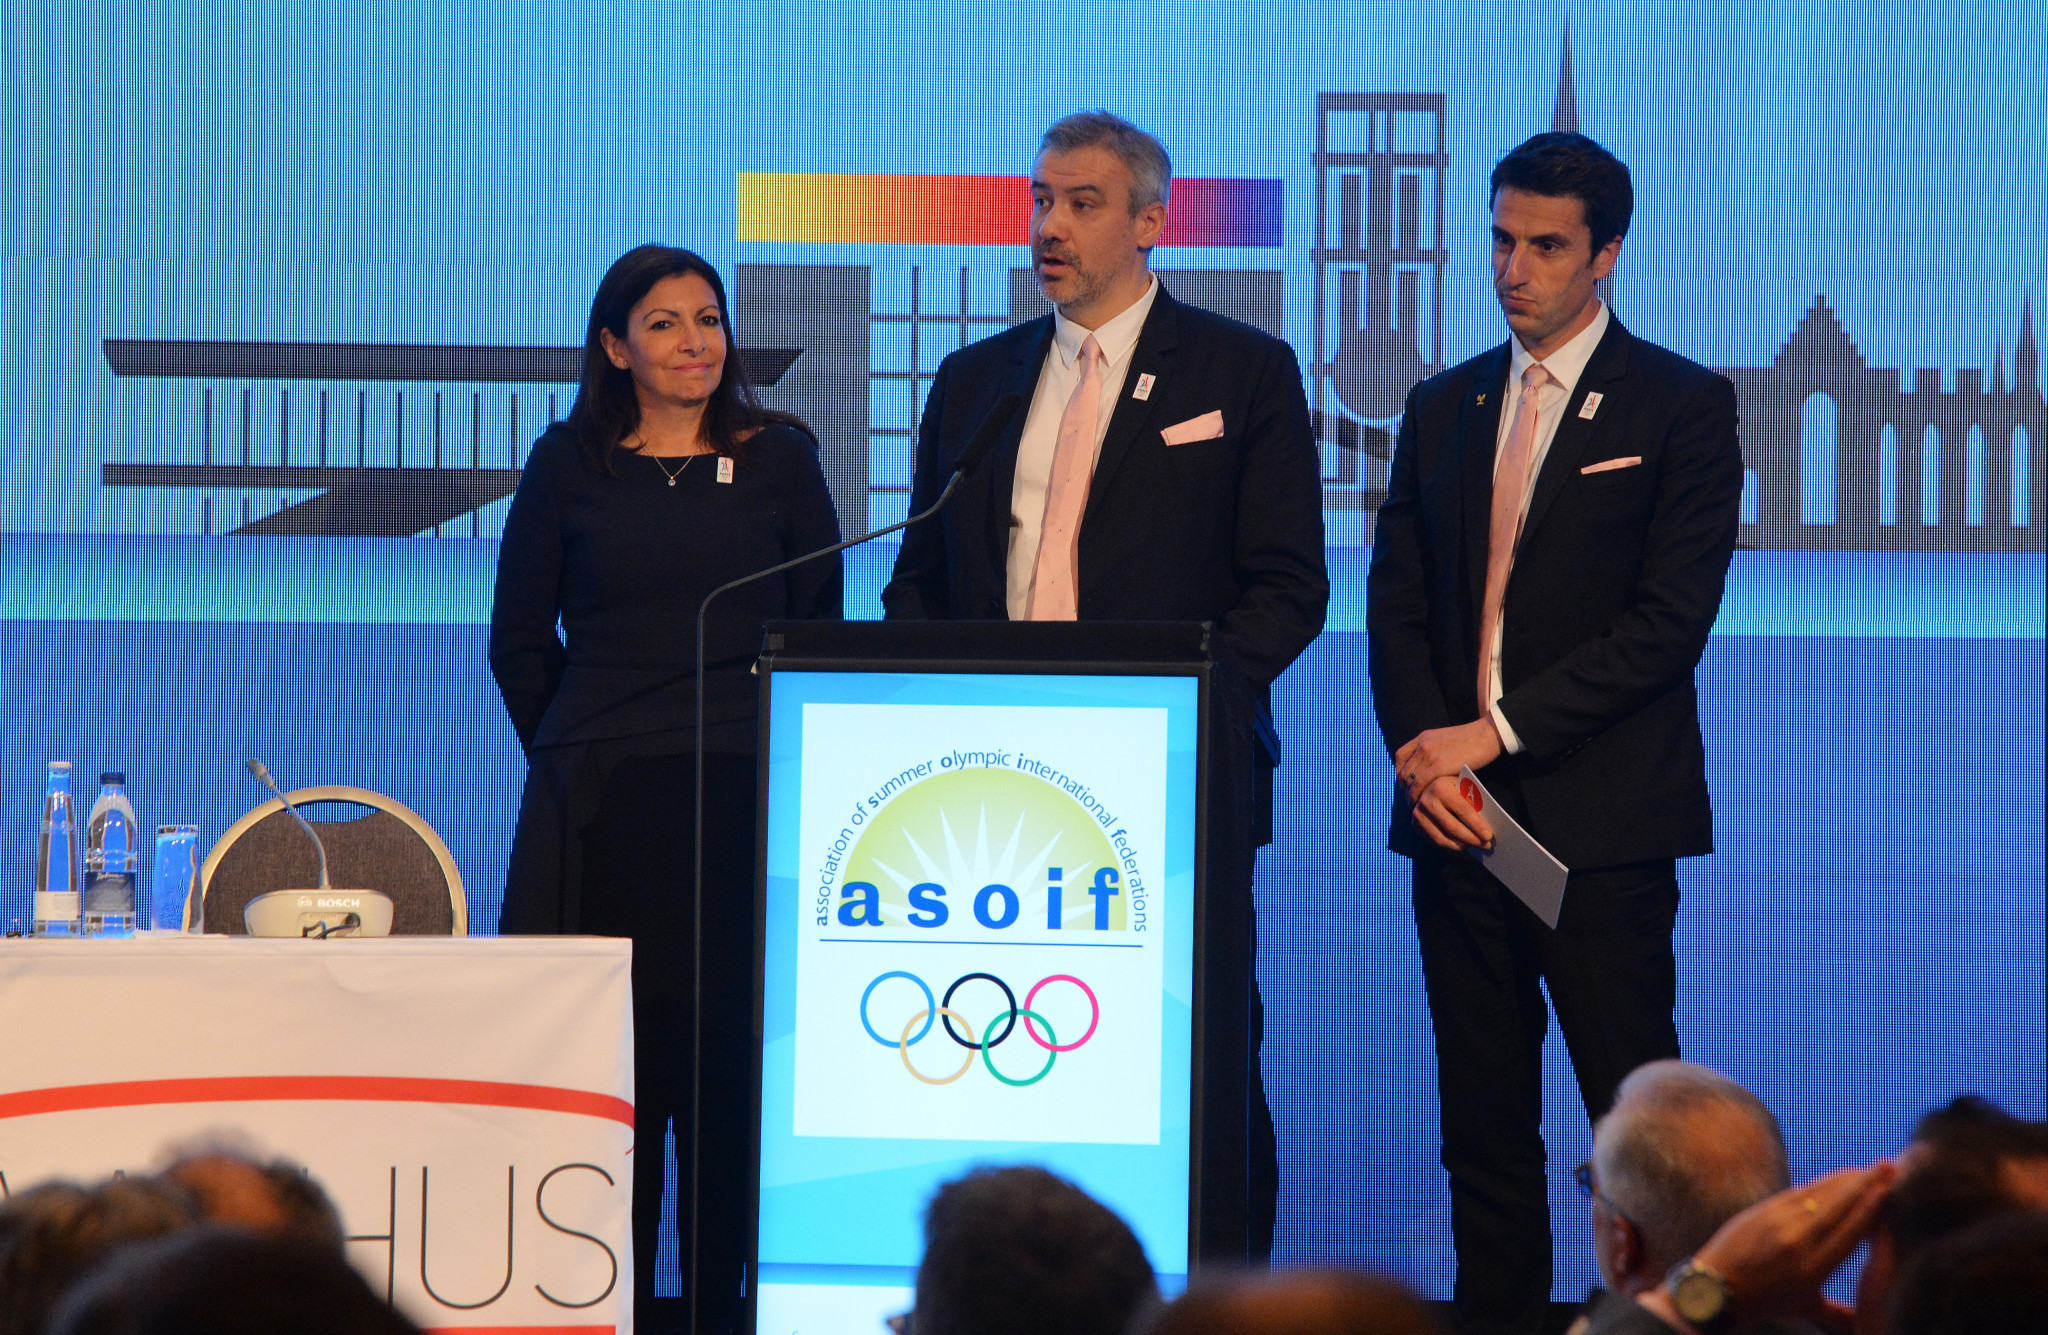 Paris 2024 President Tony Estanguet, right, and chief executive Etiene Thobois, second right, will conduct interviews to find key staff for the French capital's Organising Committee ©Getty Images